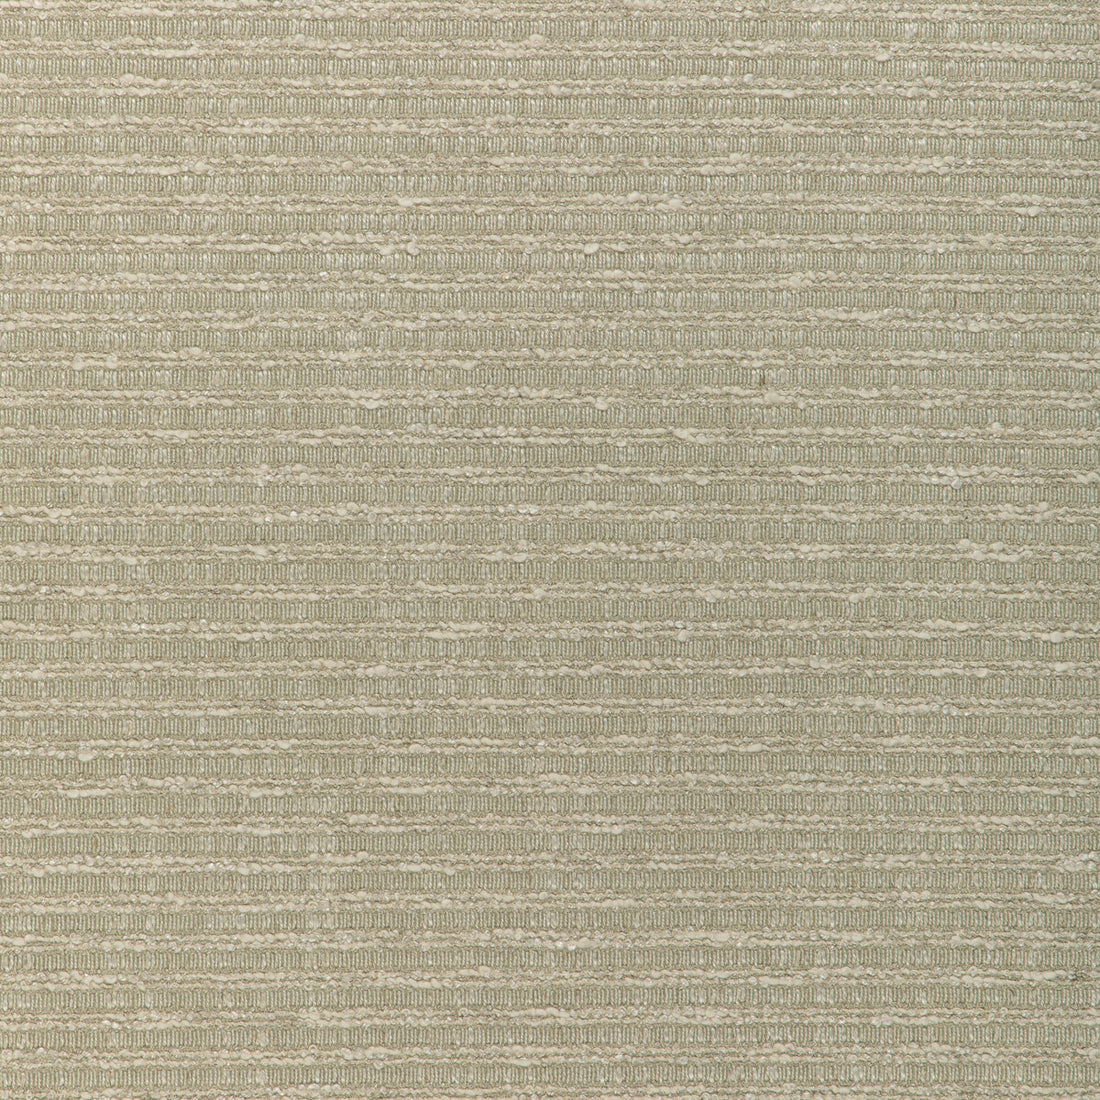 Plushy Stripe fabric in linen color - pattern 36859.16.0 - by Kravet Couture in the Atelier Weaves collection